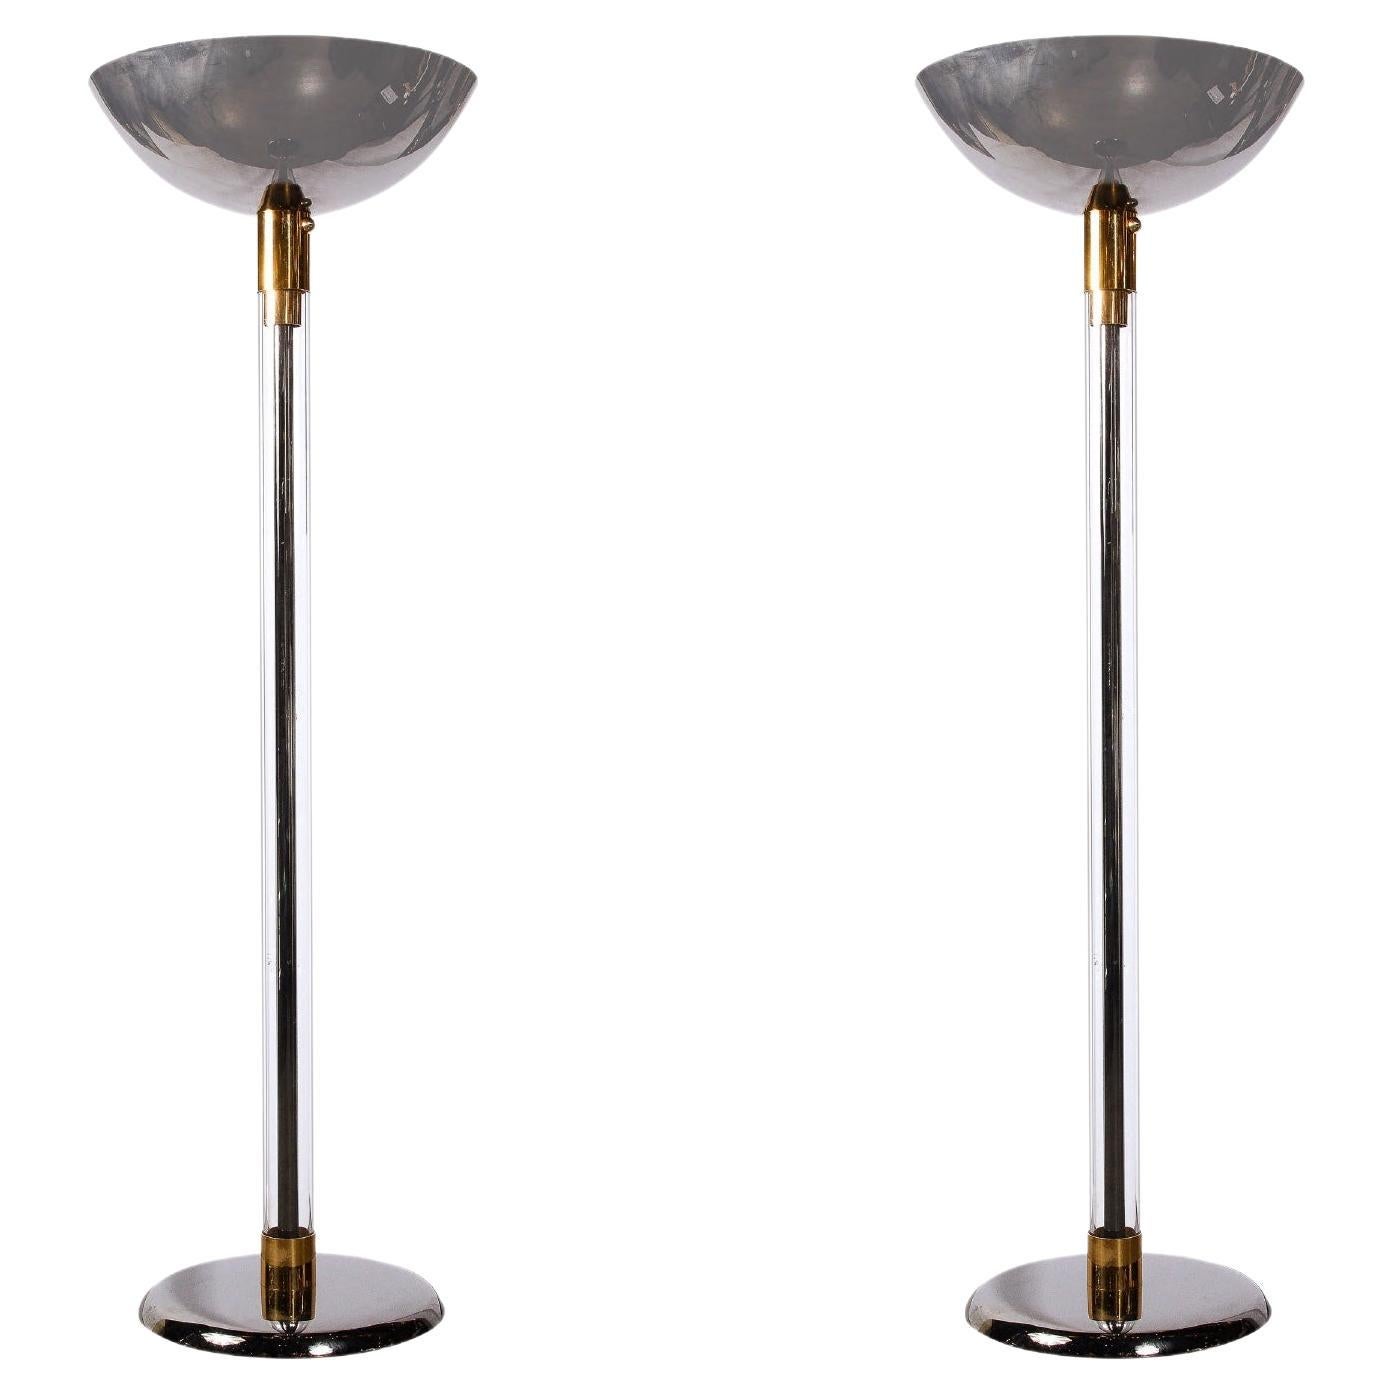 Pair of Lucite & Gunmetal Torchieres w/ Brass Fittings, Signed Karl Springer For Sale